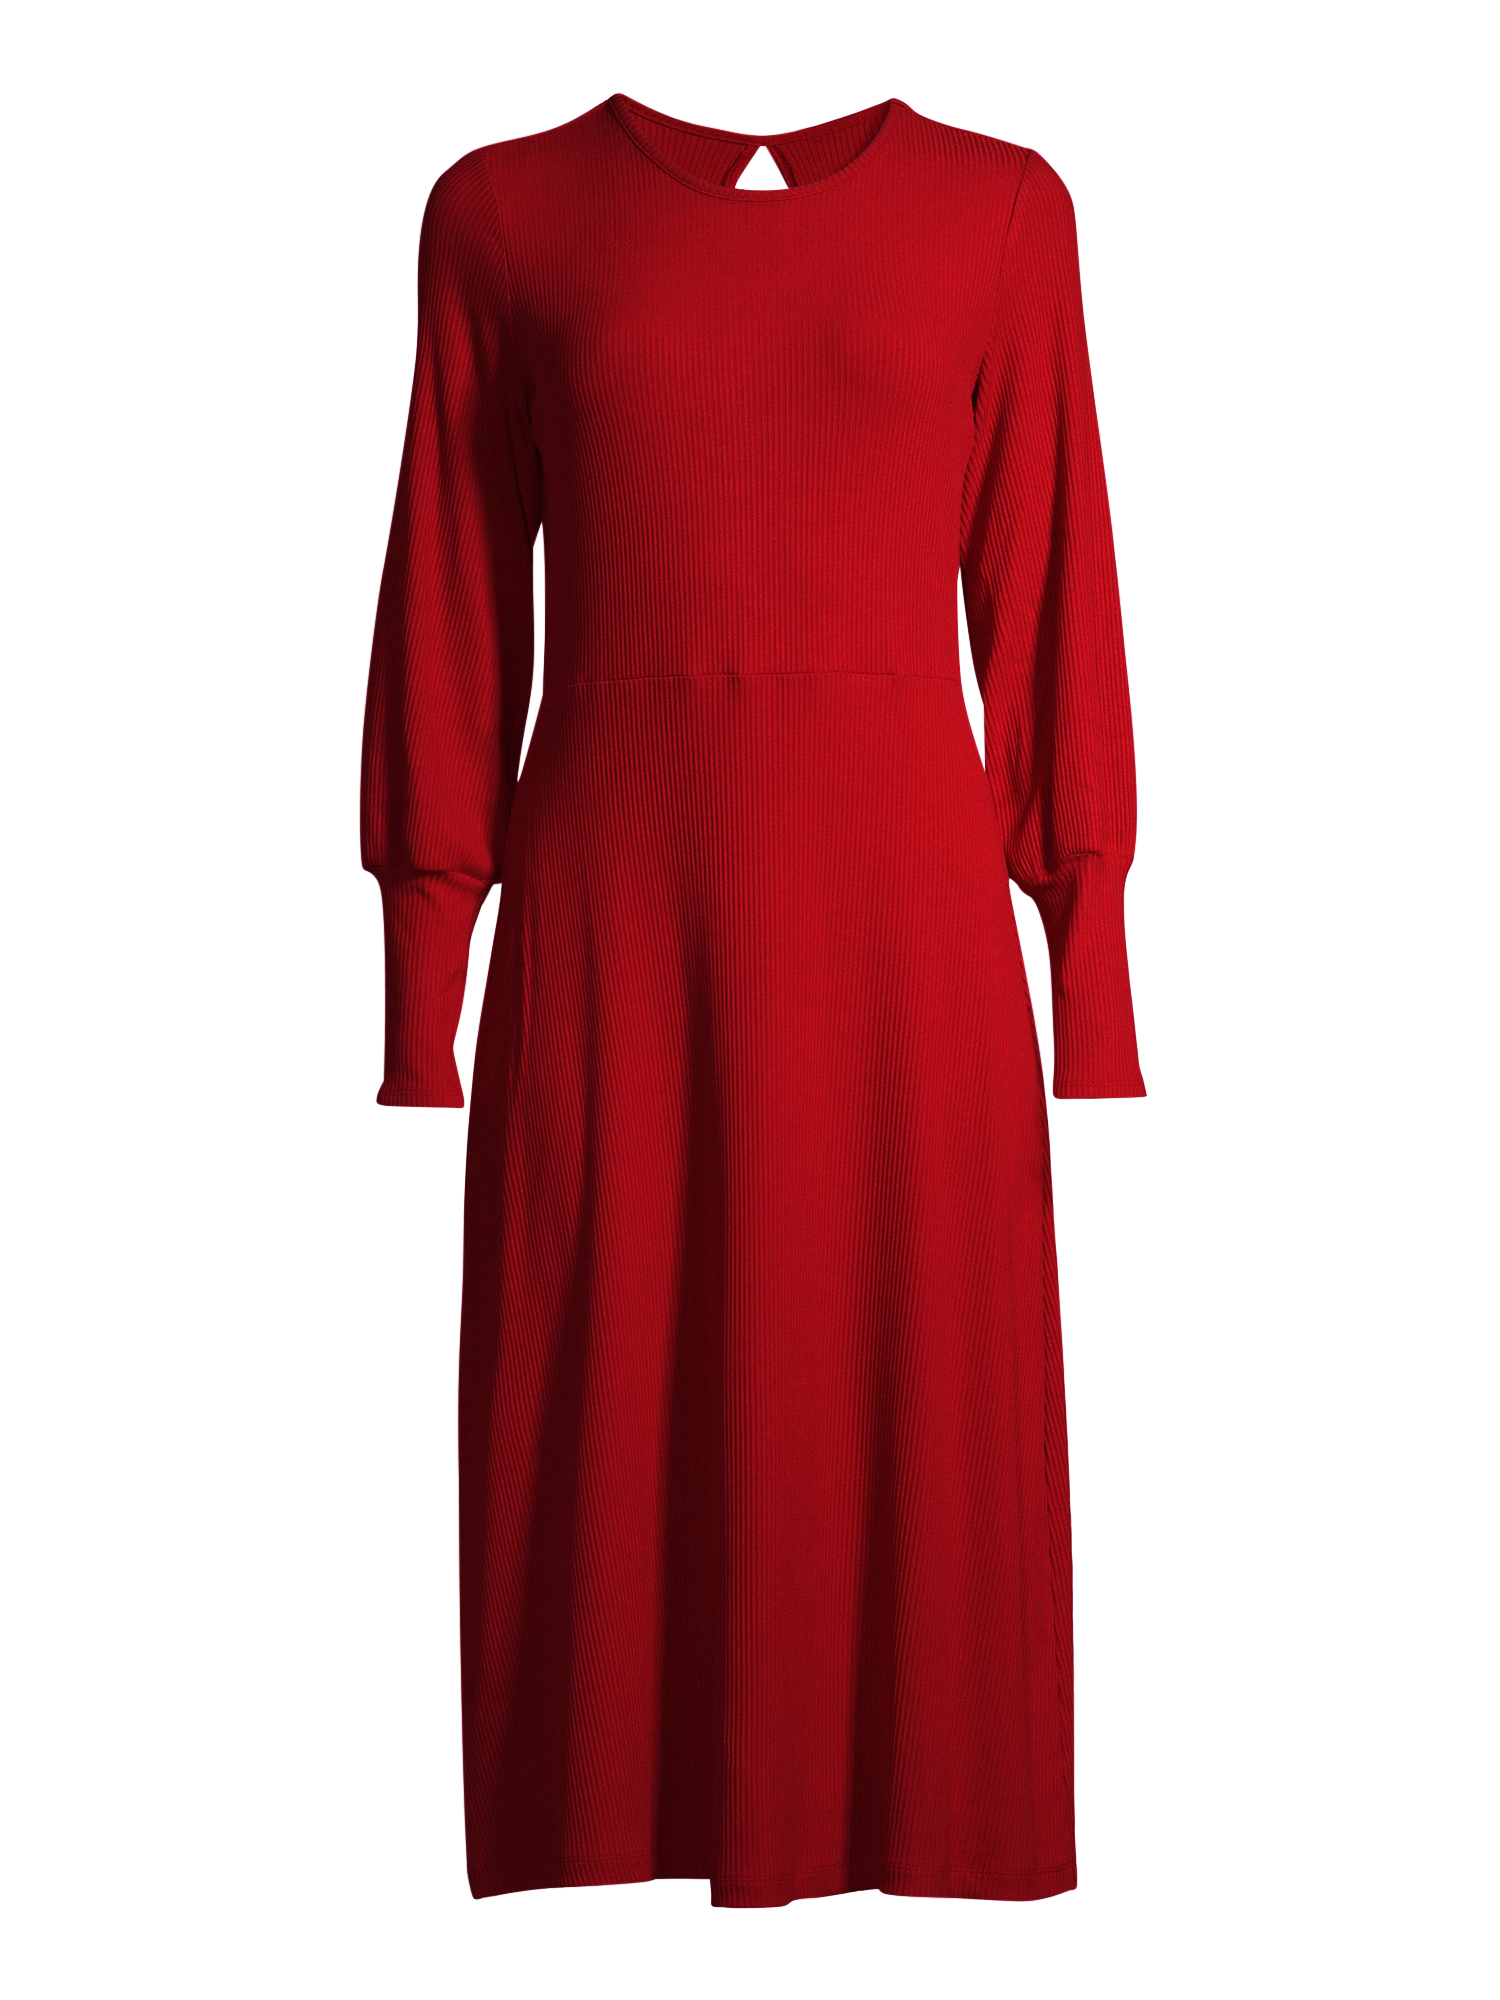 Free Assembly Women’s Fit & Flare Rib Knit Dress - image 3 of 6